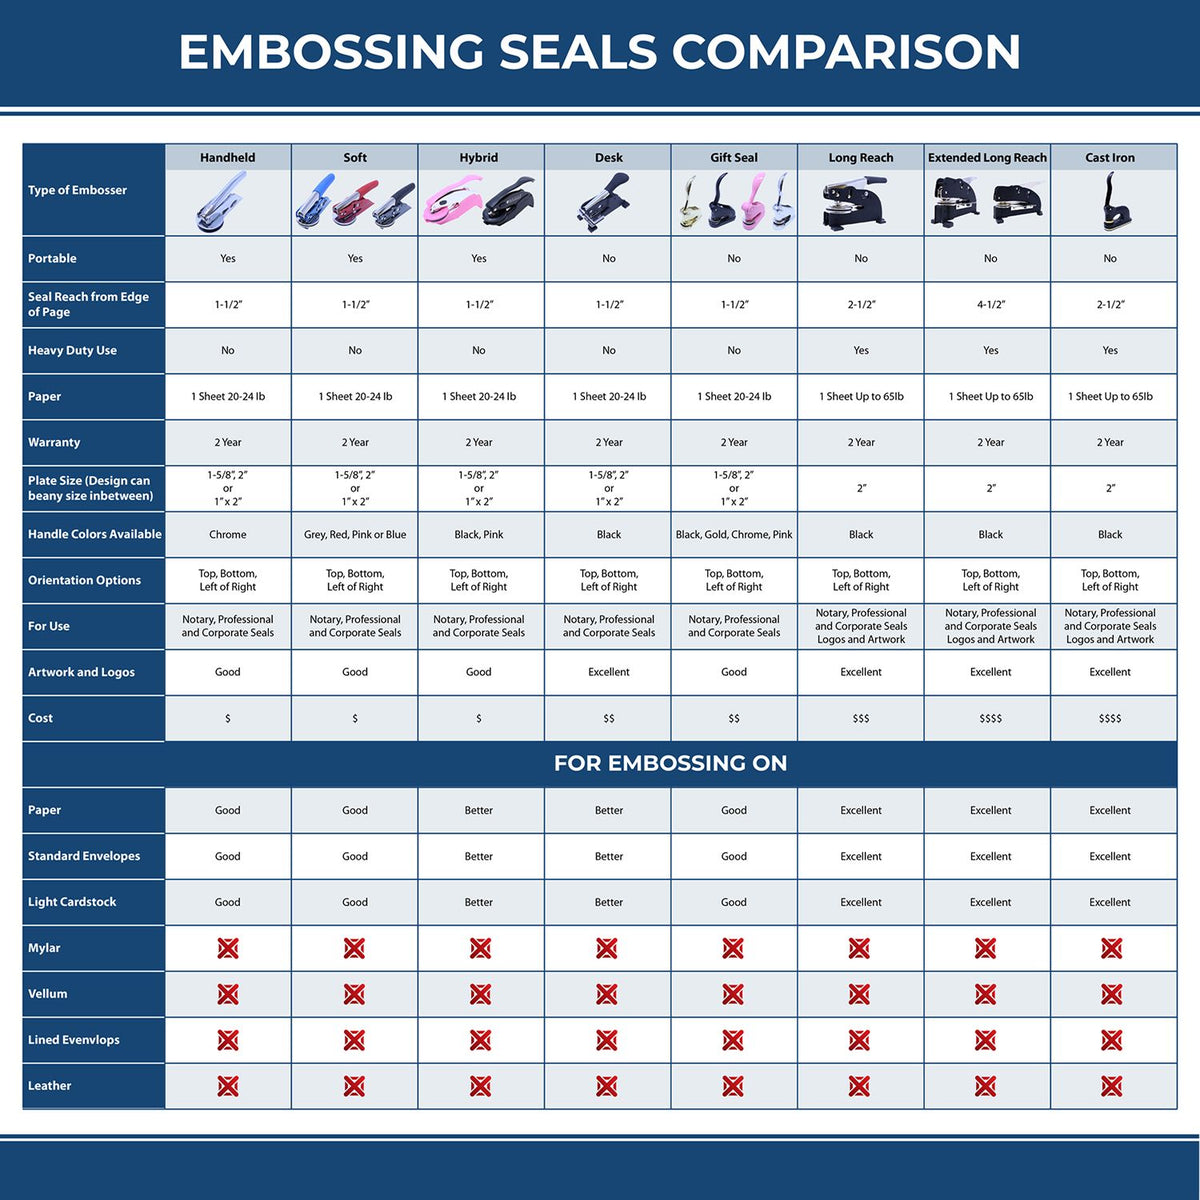 A comparison chart for the different types of mount models available for the Heavy Duty Cast Iron Alabama Land Surveyor Seal Embosser.